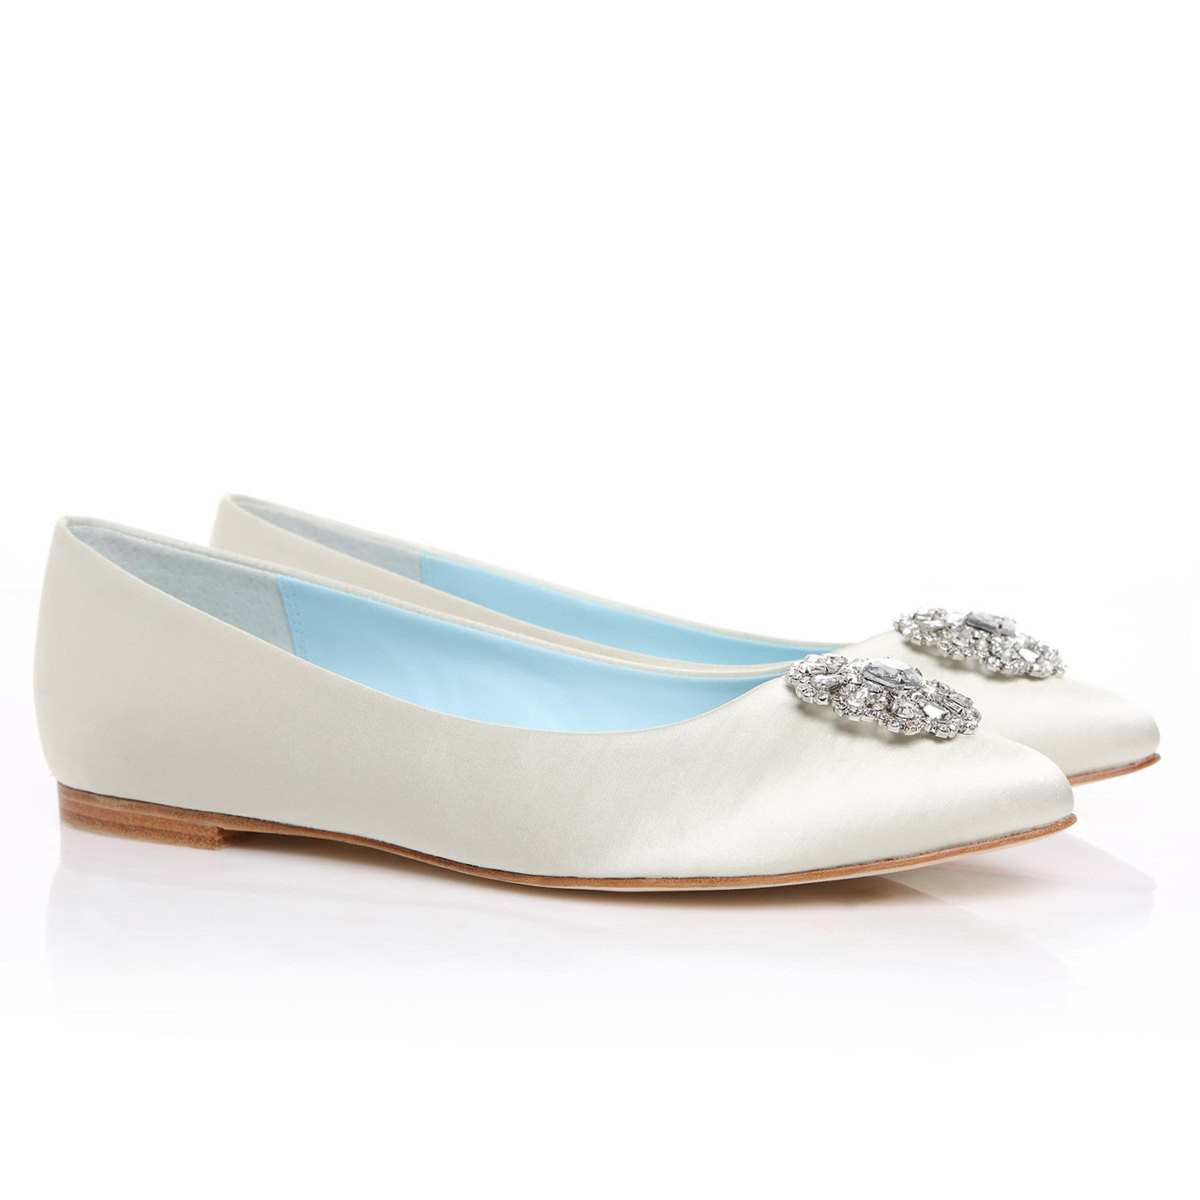 White Wedding Shoes Flats
 White Bridal Flats Wedding Flats Shoes with Crystal and